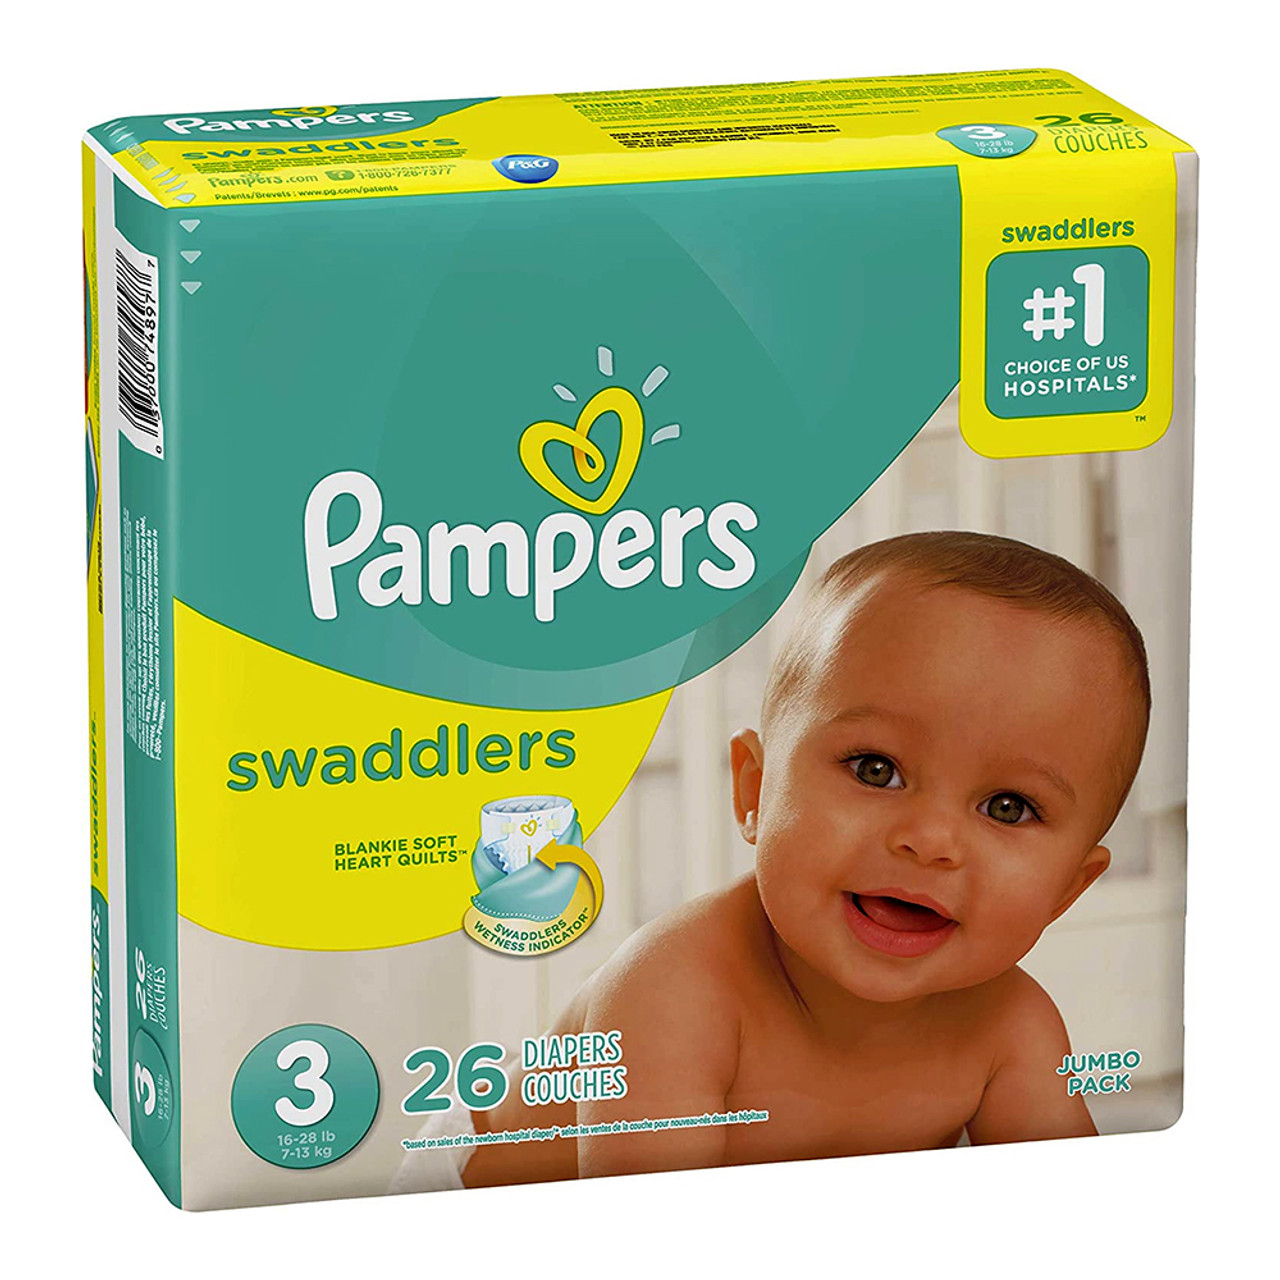 Verdrag Emigreren Patois Pampers Swaddlers Diapers, Soft and Absorbent, Size 3, 26 Ct